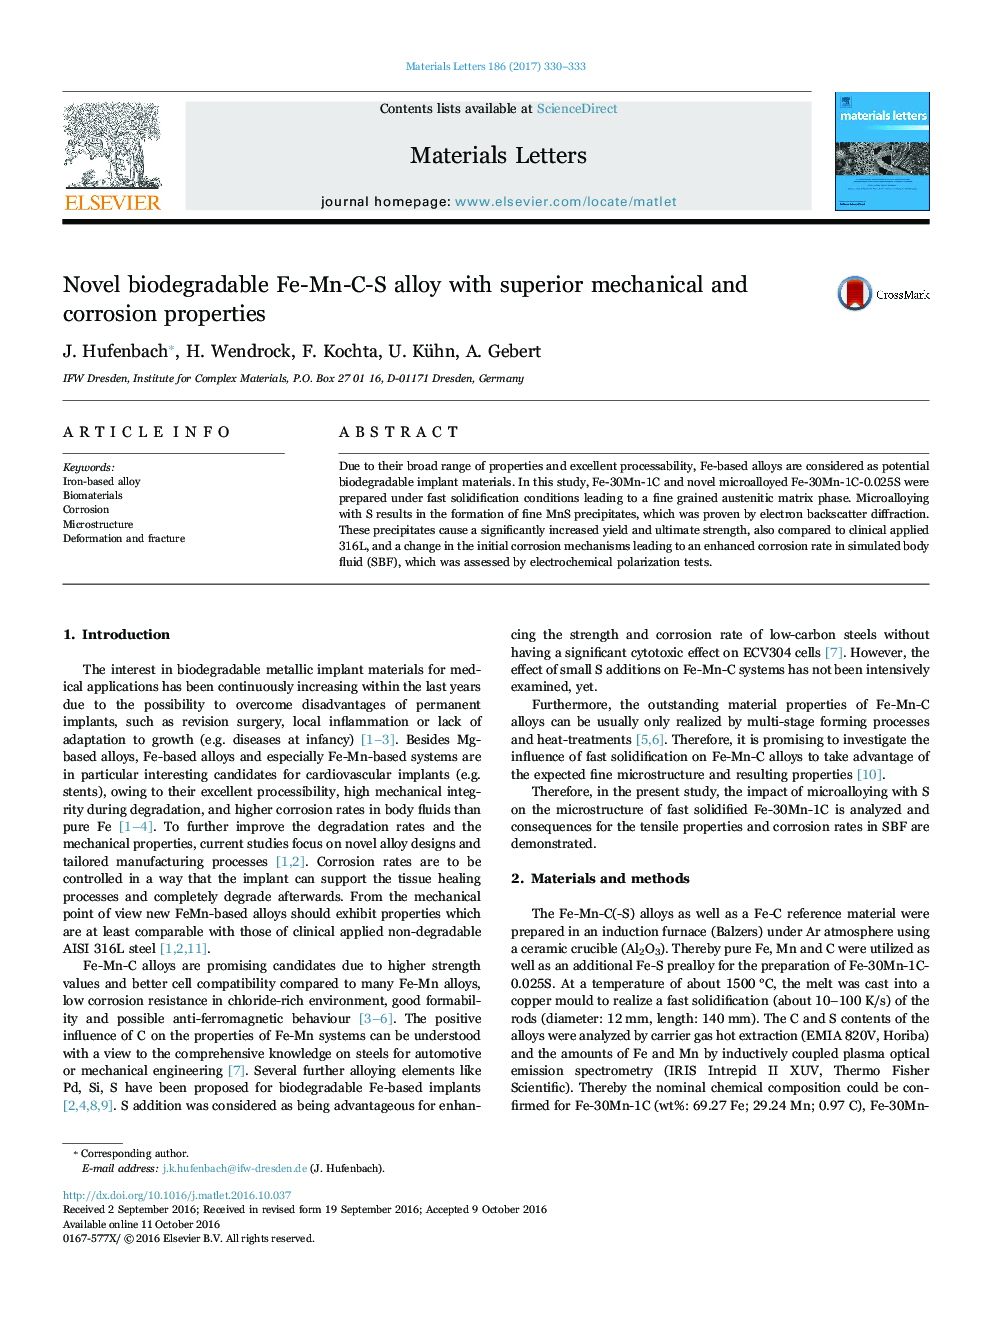 Novel biodegradable Fe-Mn-C-S alloy with superior mechanical and corrosion properties